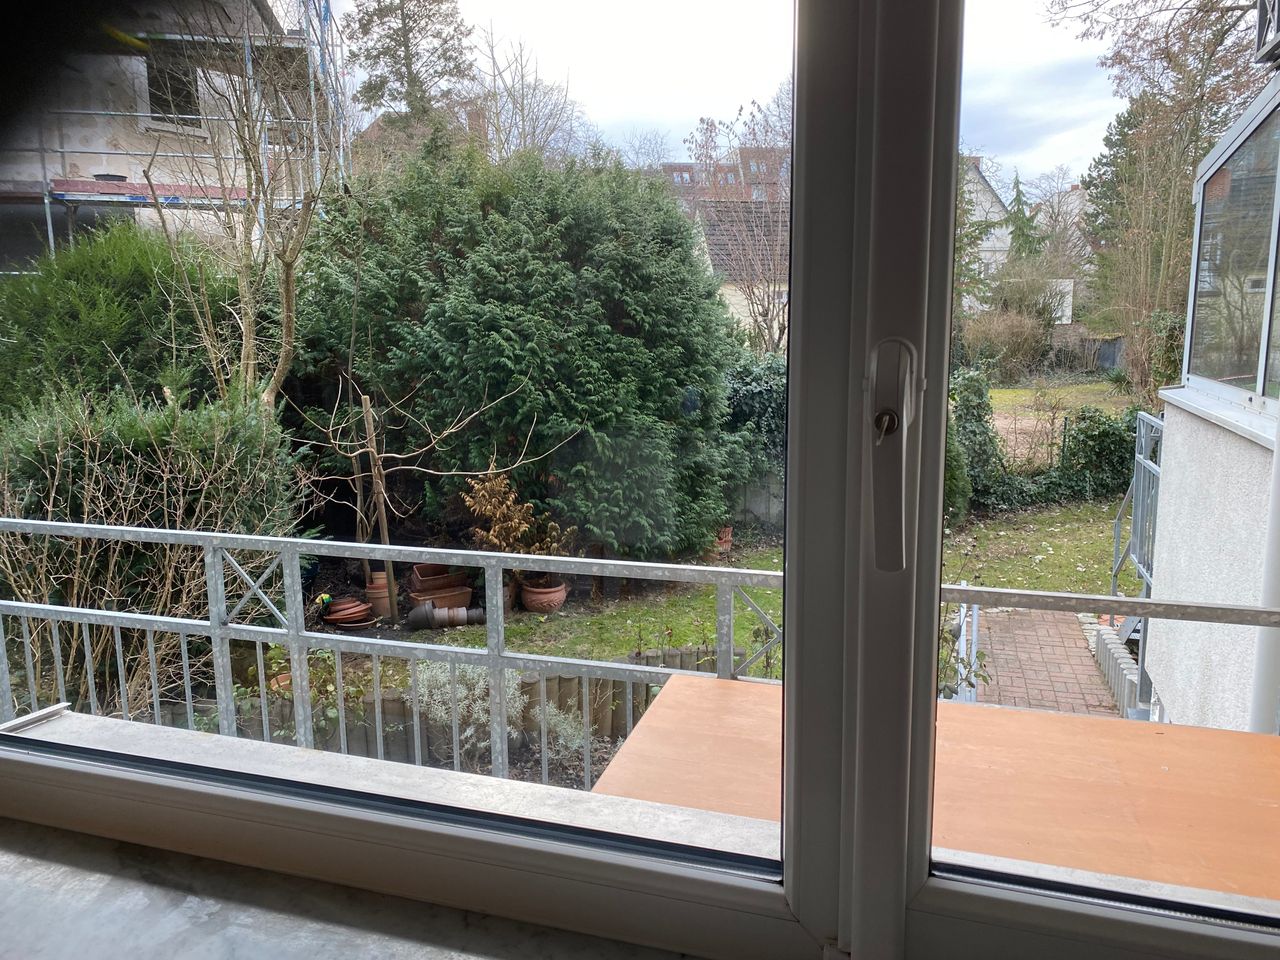 Sunny, fully furnished and newly renovated flat in Schmargendorf/Wilmersdorf close to Freie University (FU)